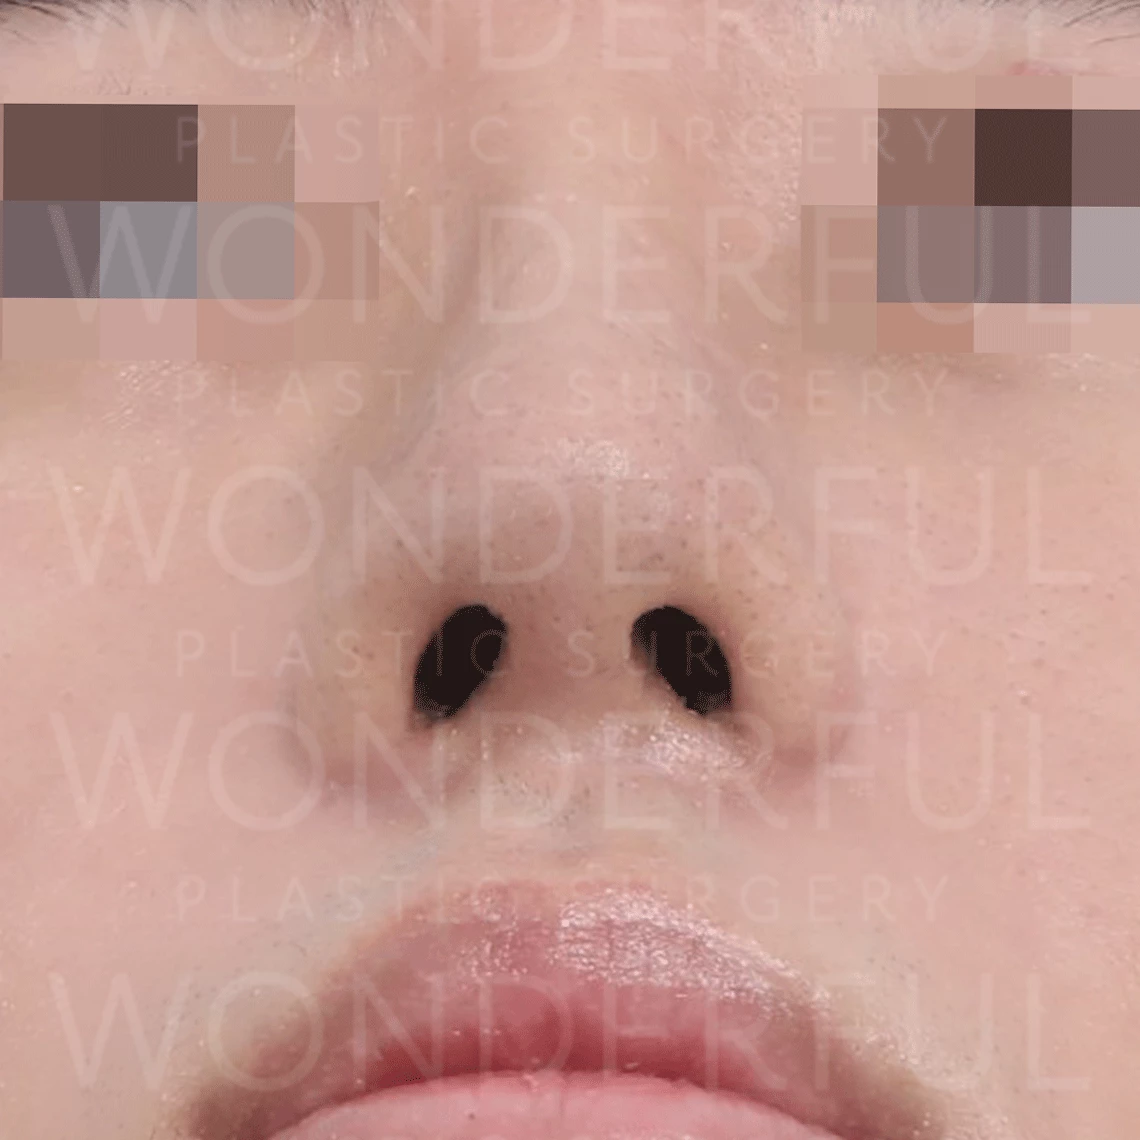 wonderful-plastic-surgery-hospital-in-korea-nostril-alar-reduction-surgery-before-after-results-after-1